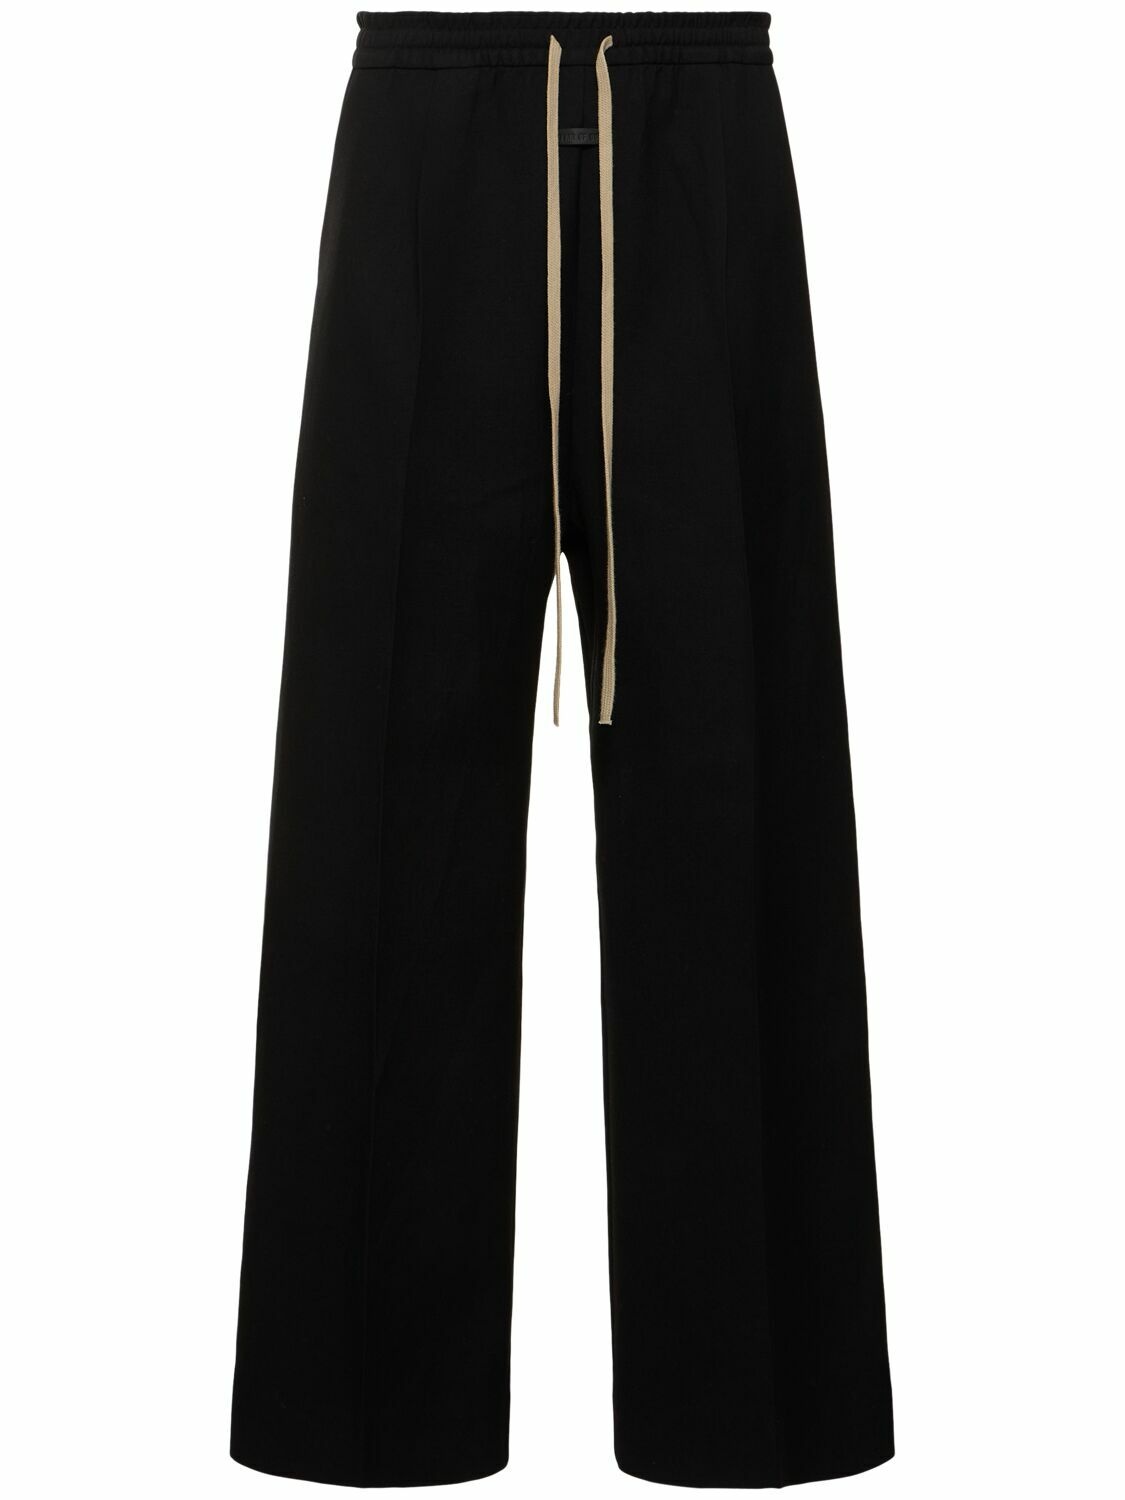 Photo: FEAR OF GOD Pleated Cotton Blend Wide Pants